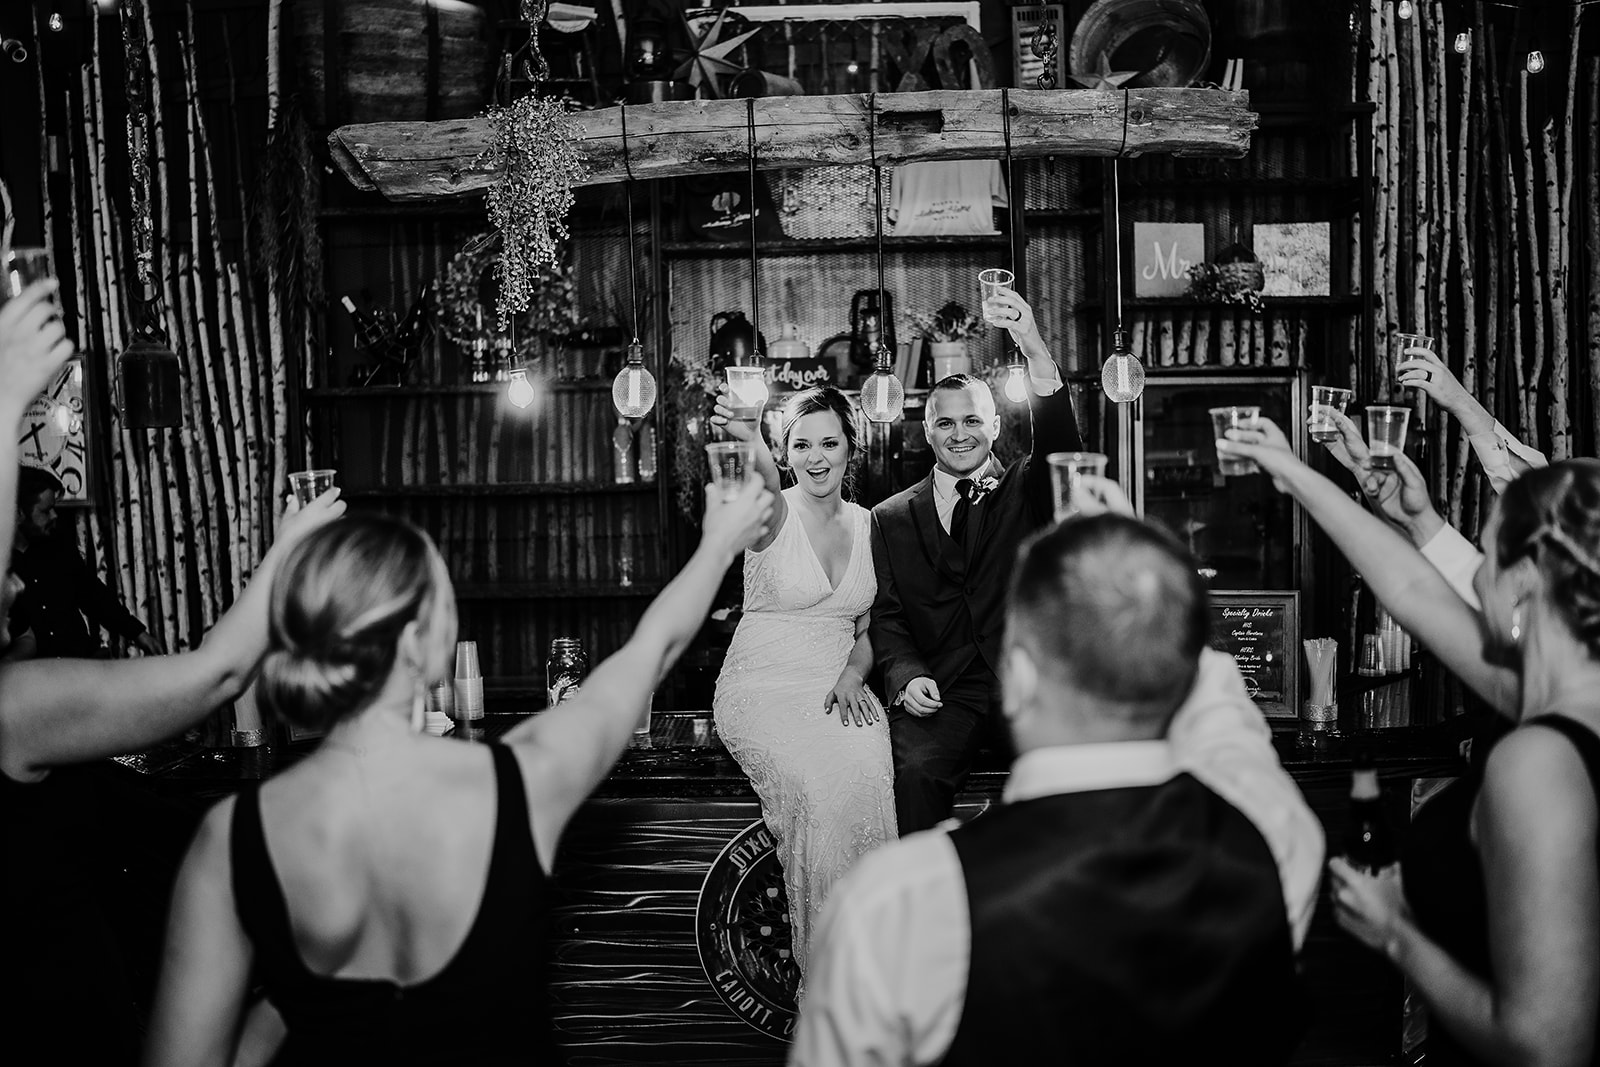 The Wisconsin newlyweds toast to their guests in their rustic wedding venue bar. Chippewa Valley wedding Rustic wedding day Black and white wedding photos #dixonappleorchard #orchardweddingvenue #outdoorwedding #appleorchardwedding #wisconsinweddingvenue